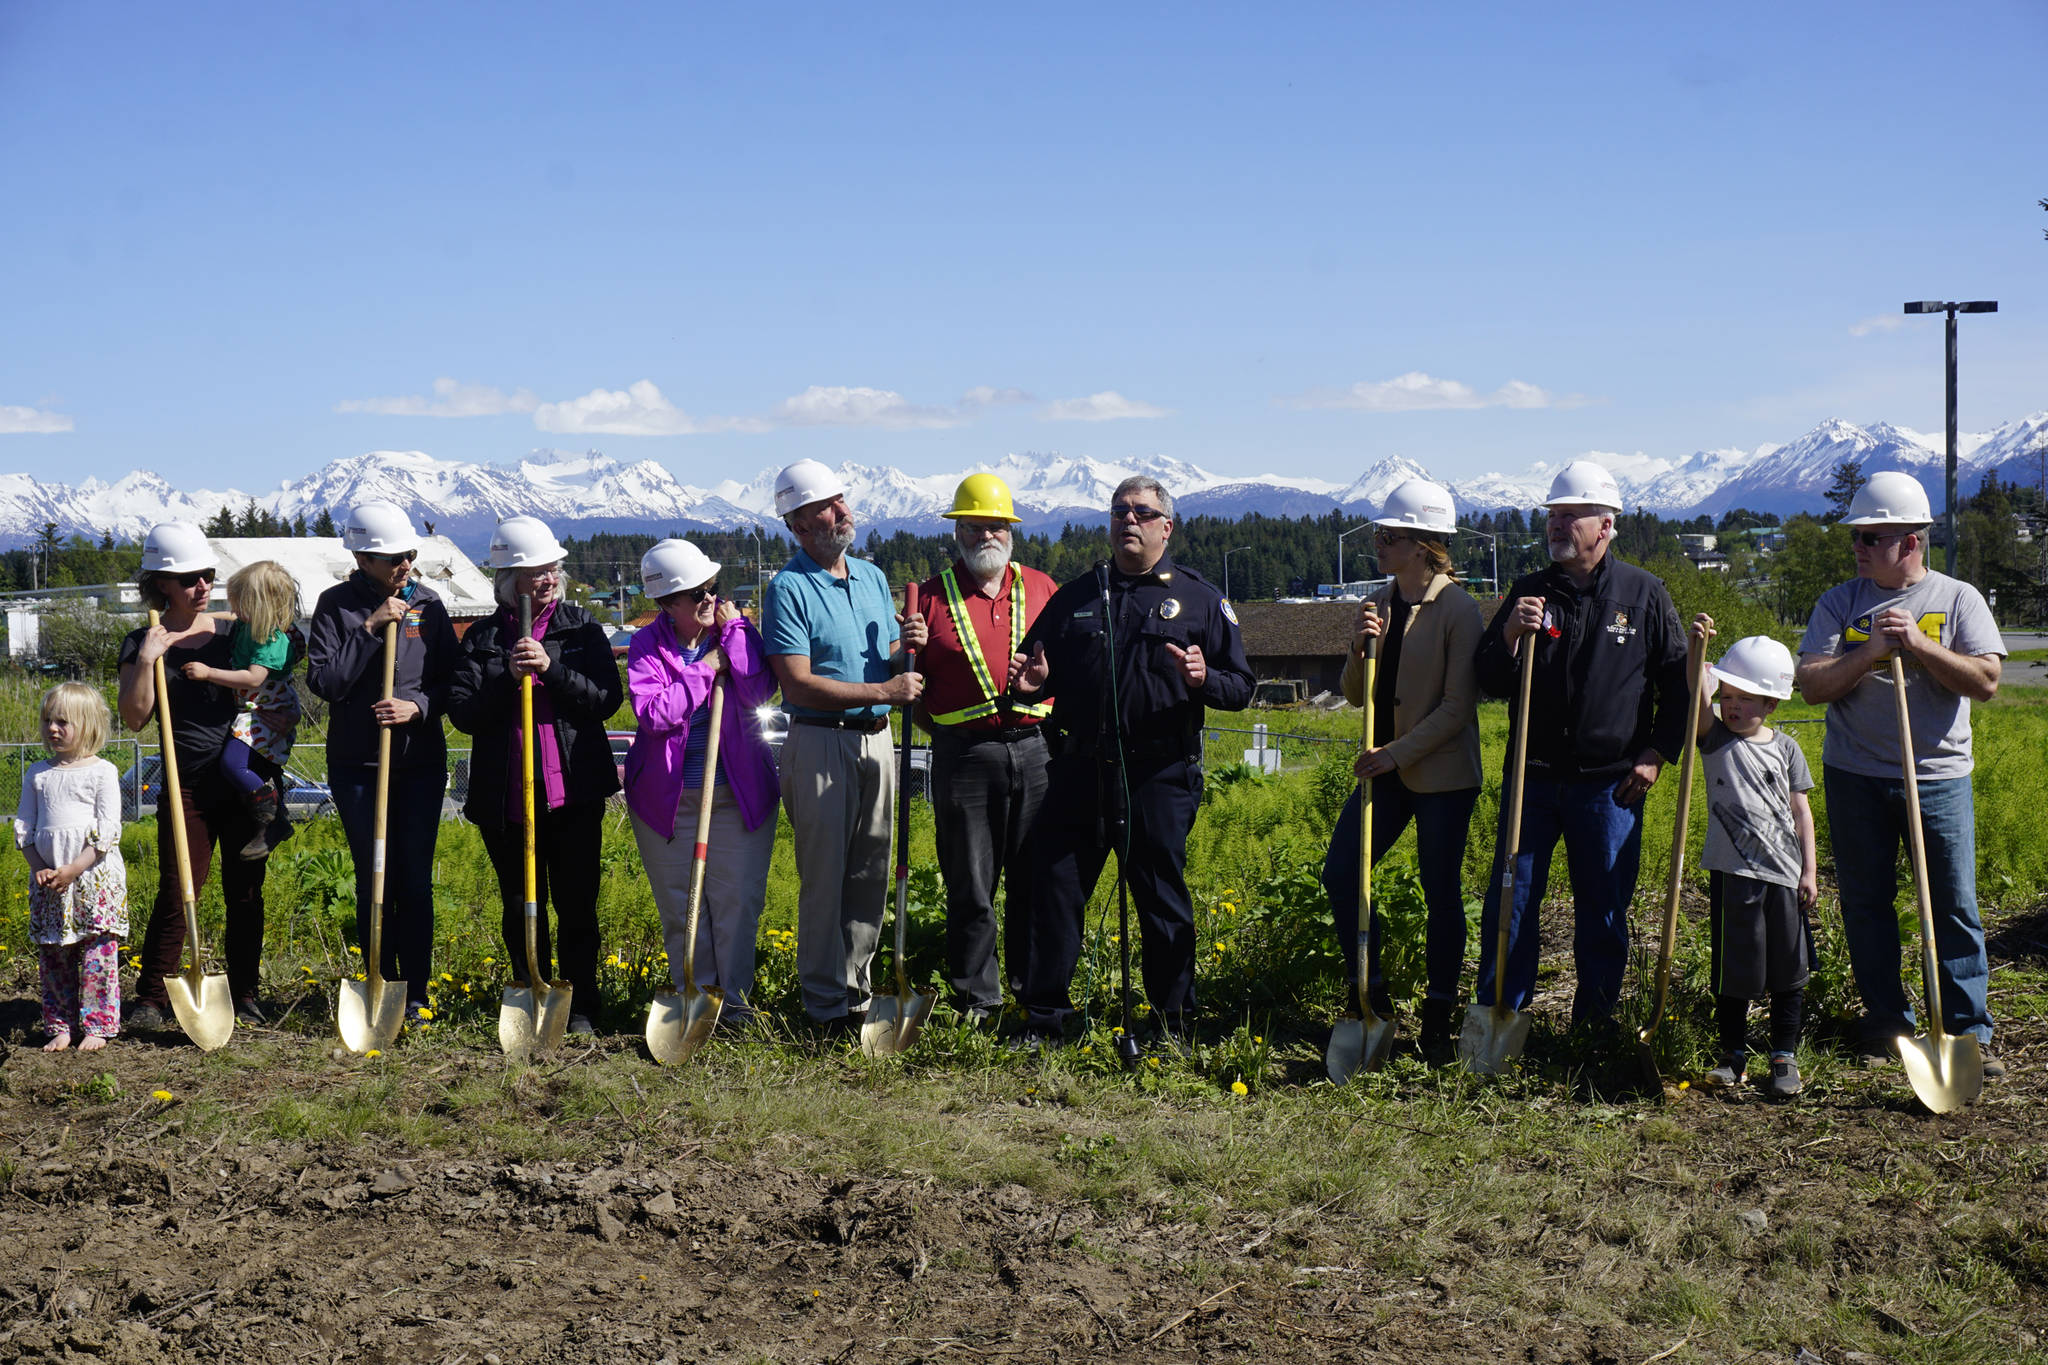 Homer Police Chief Mark Robl, center, speaks at the groundbreaking ceremony for the new Homer Police Station on Grubstake Avenue last Friday, May 24, 2019, in Homer, Alaska. From left to right are Homer City Council member Rachel Lord with her two children, Sadie and Linnea, council member Donna Aderhold, council member Shelly Erickson, council member Caroline Venuti, former Homer Mayor Bryan Zak, Mayor Ken Castner, Robl, Homer City Manager Katie Koester, and Byron Smith, son of council member Heath Smith, far right. (Photo by Michael Armstrong/Homer News)